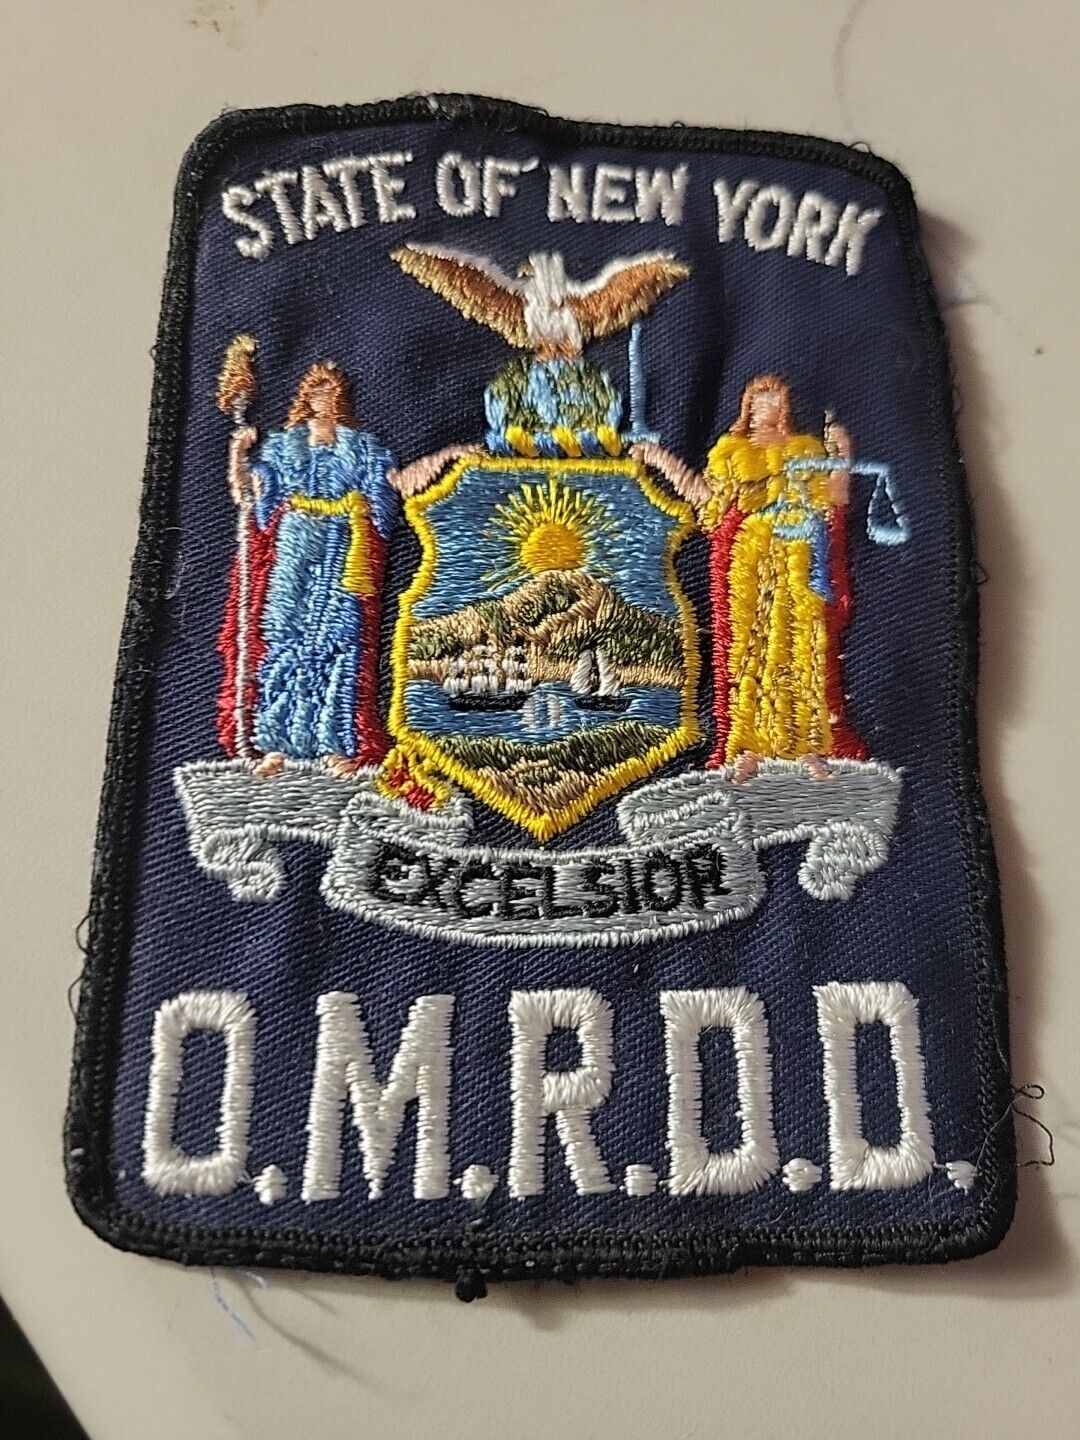 Vintage State of New York DMRD  Sew on patch